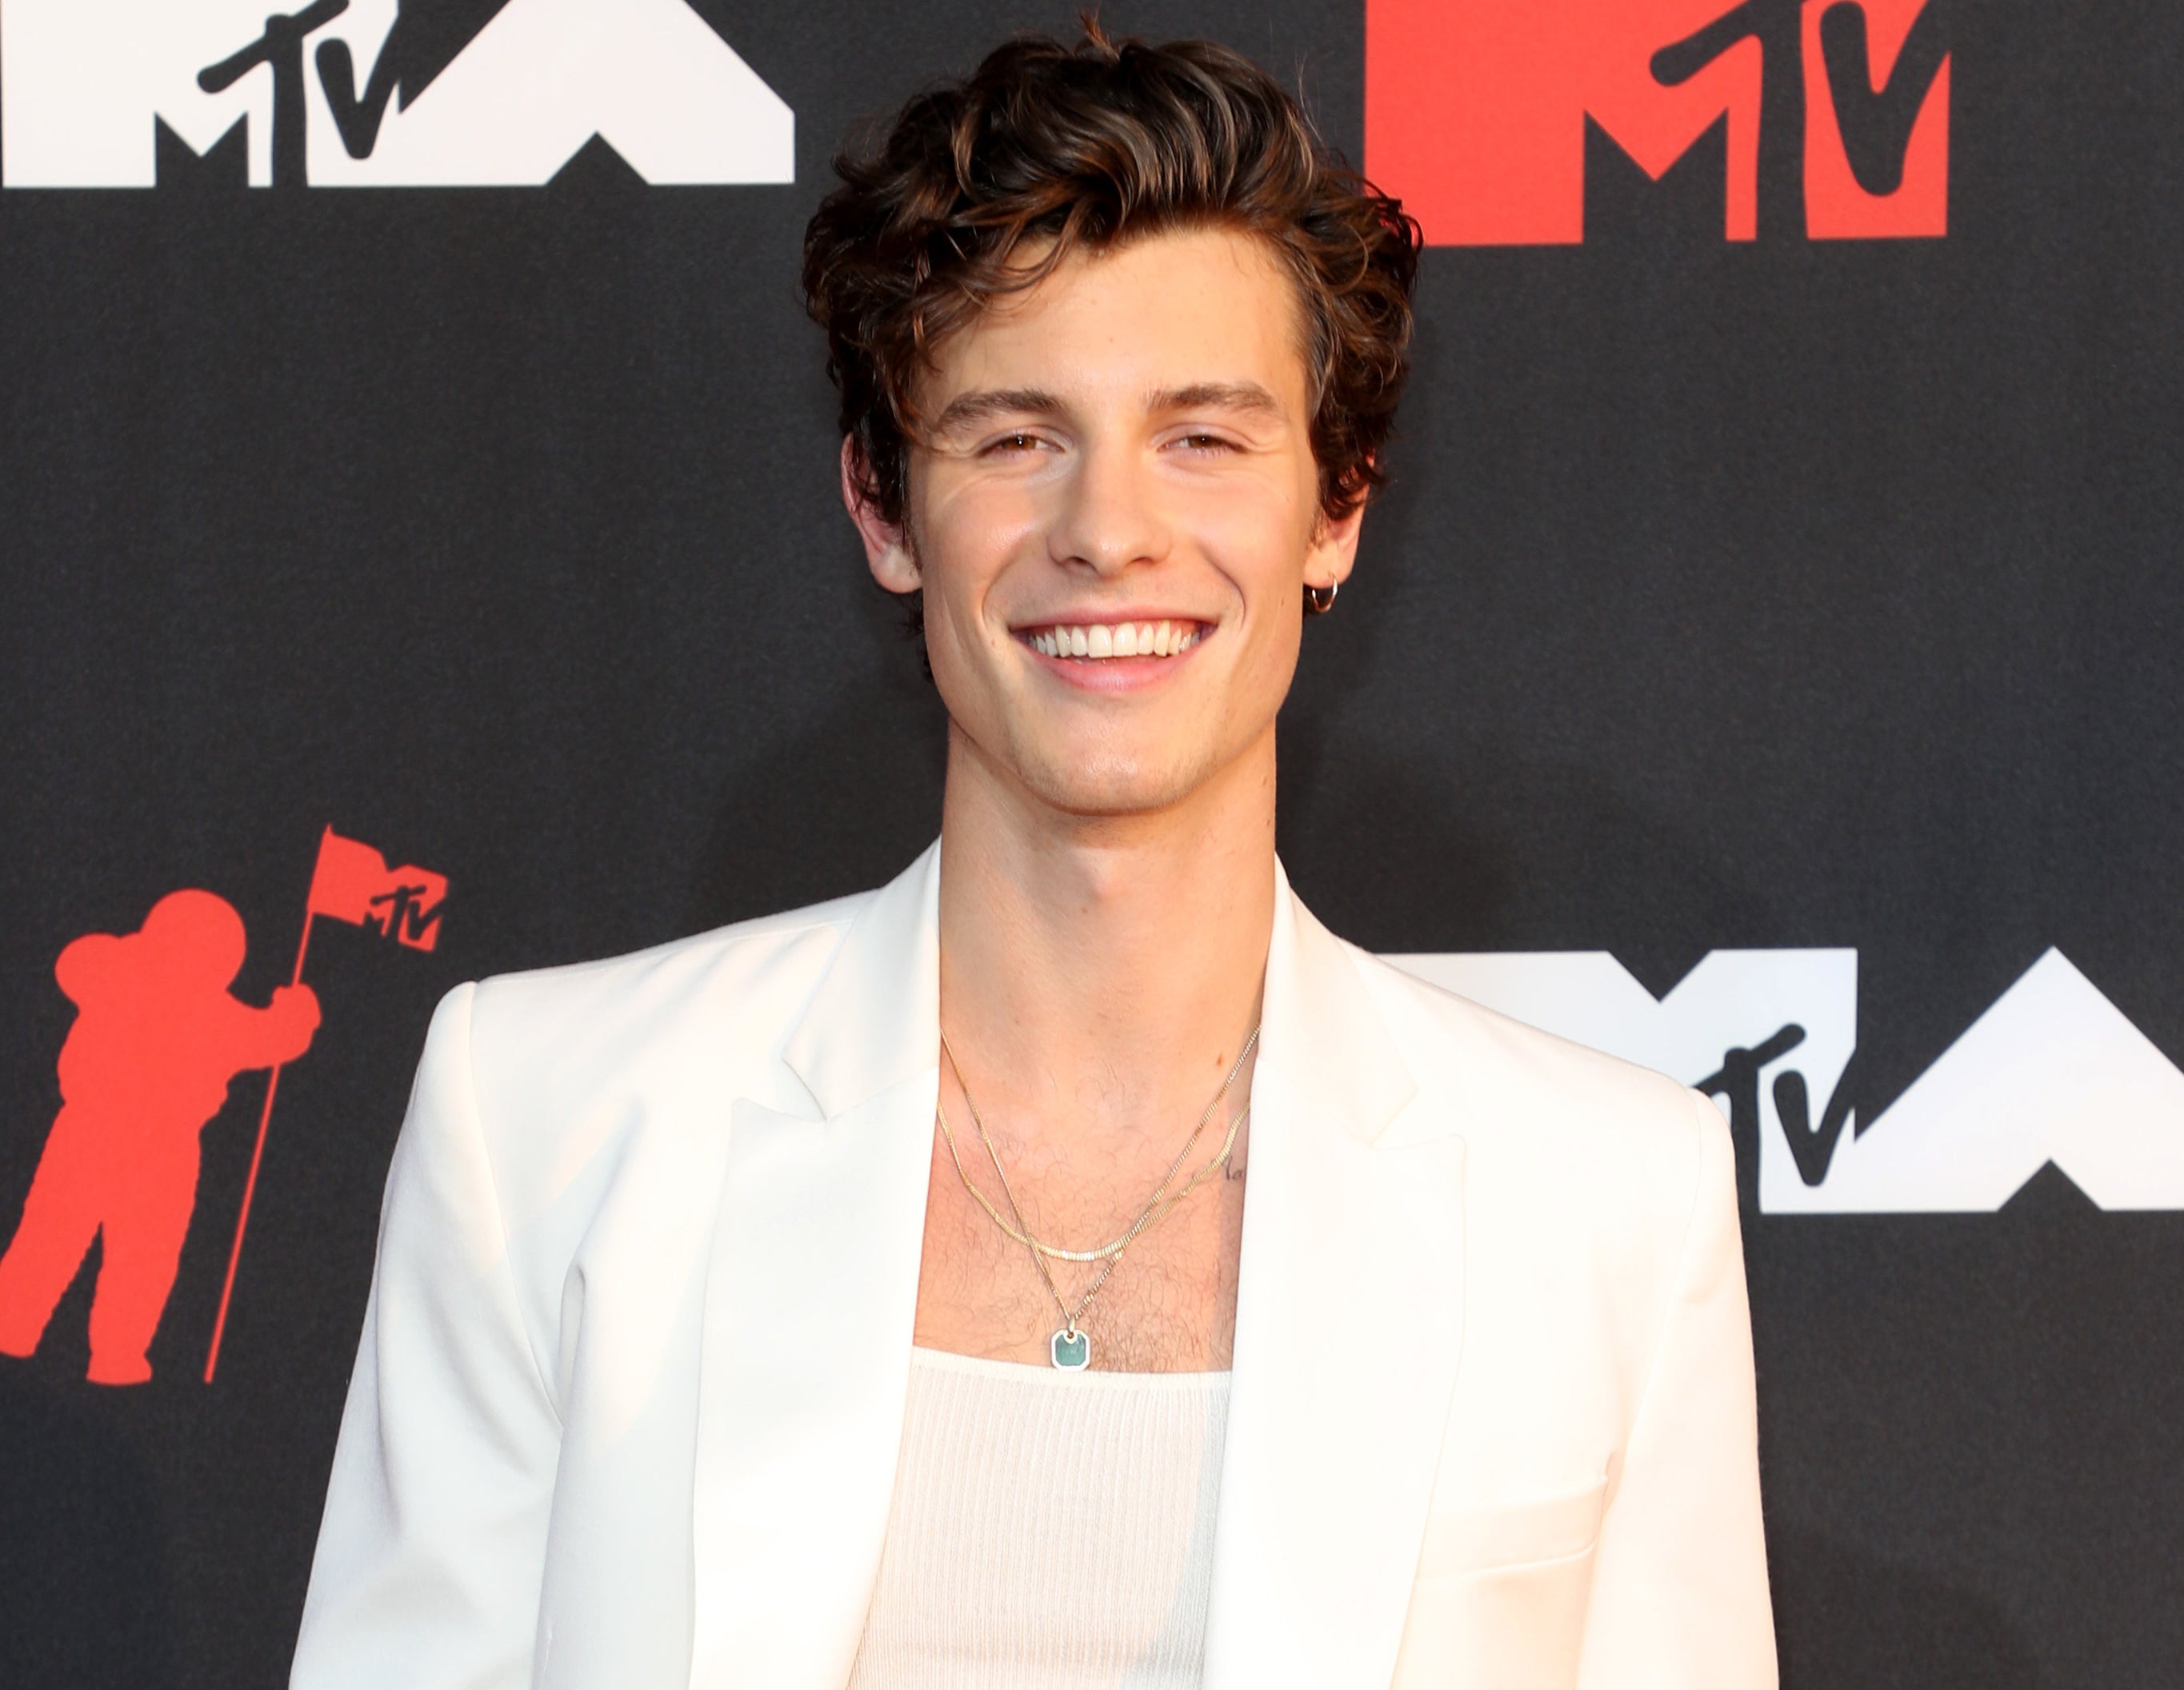 Shawn wears a white suit jacket to an award show